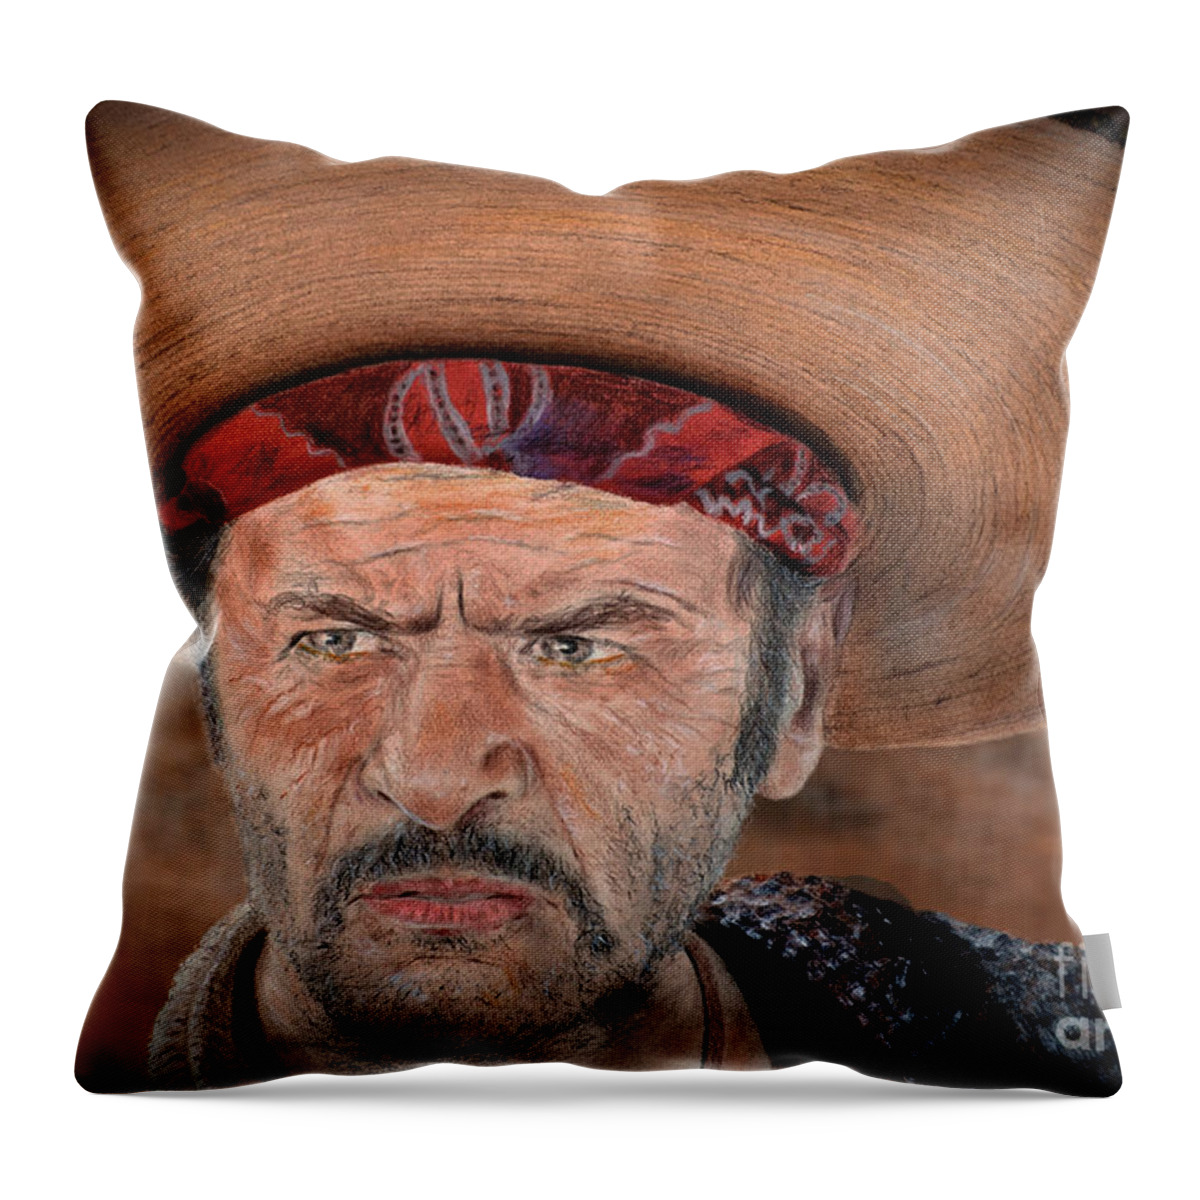 Eli Wallach As Tuco In The Good The Bad And The Ugly Throw Pillow featuring the drawing Eli Wallach as Tuco in The Good the Bad and the Ugly Version II by Jim Fitzpatrick